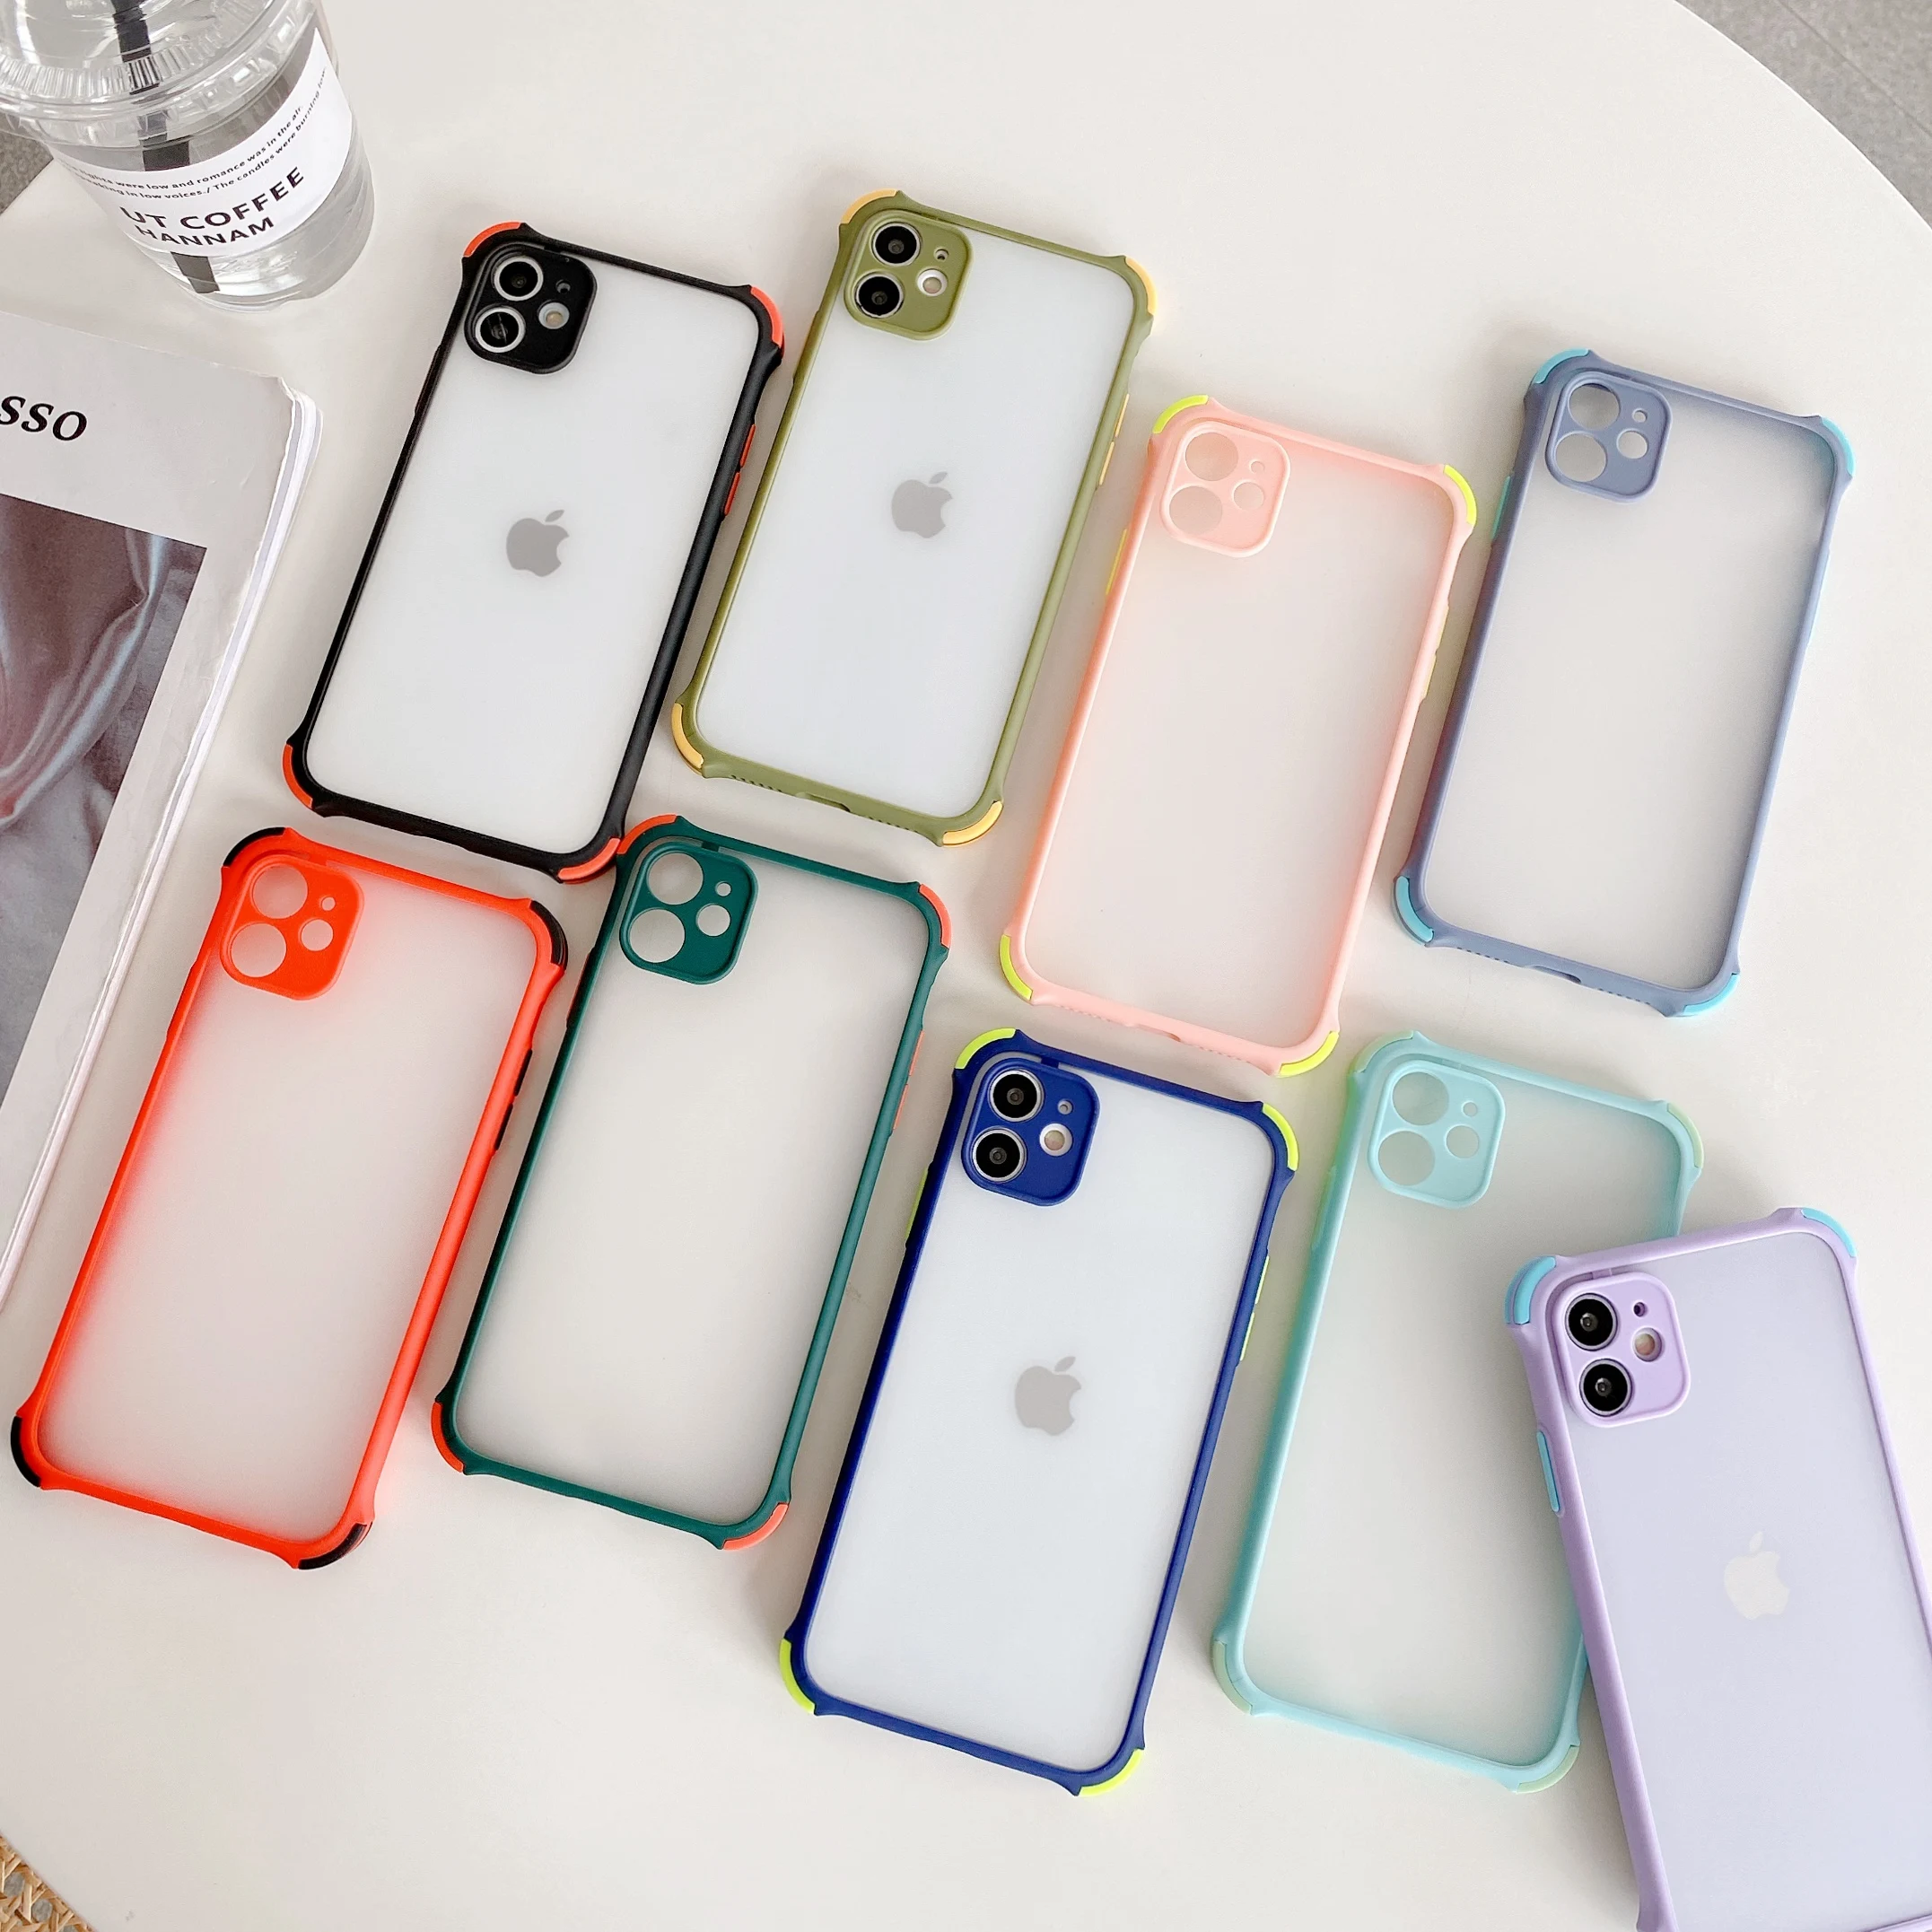 

SImple Fashion Case For Apple iPhone 13 12 11 Pro Mini XS Max SE 2020 X XR 8 7 Plus 6 Light Colorful Ultra Thin Shockfroof Cover